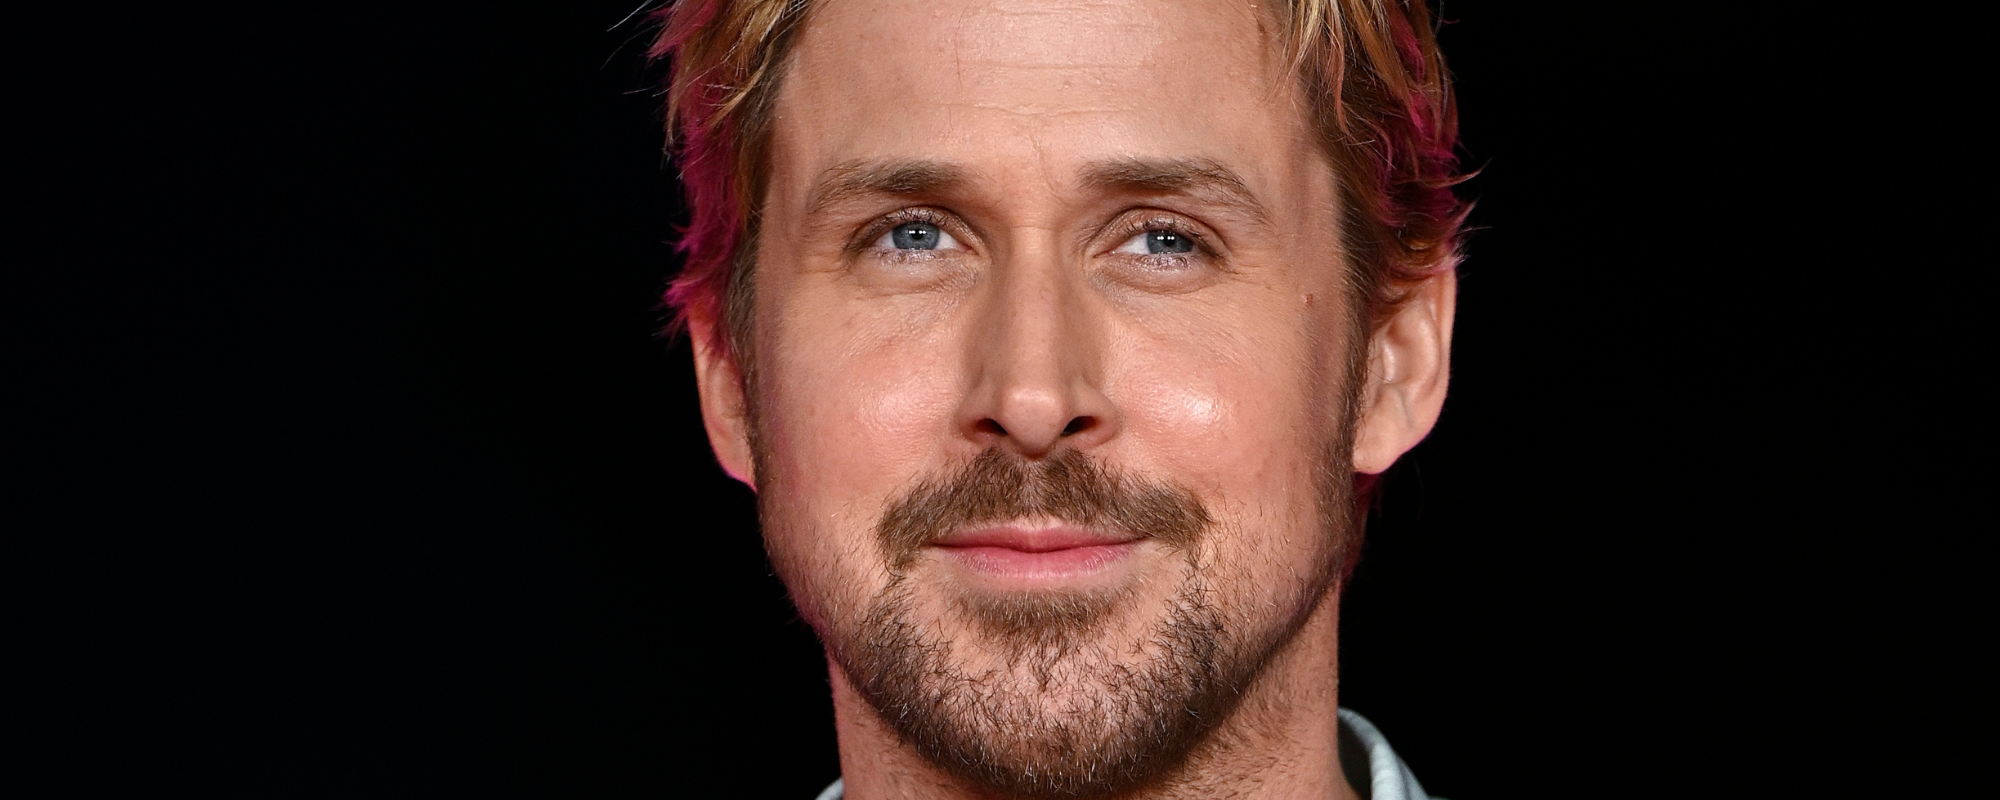 6 Songs You Didn’t Know Featured Barbie’s Ryan Gosling